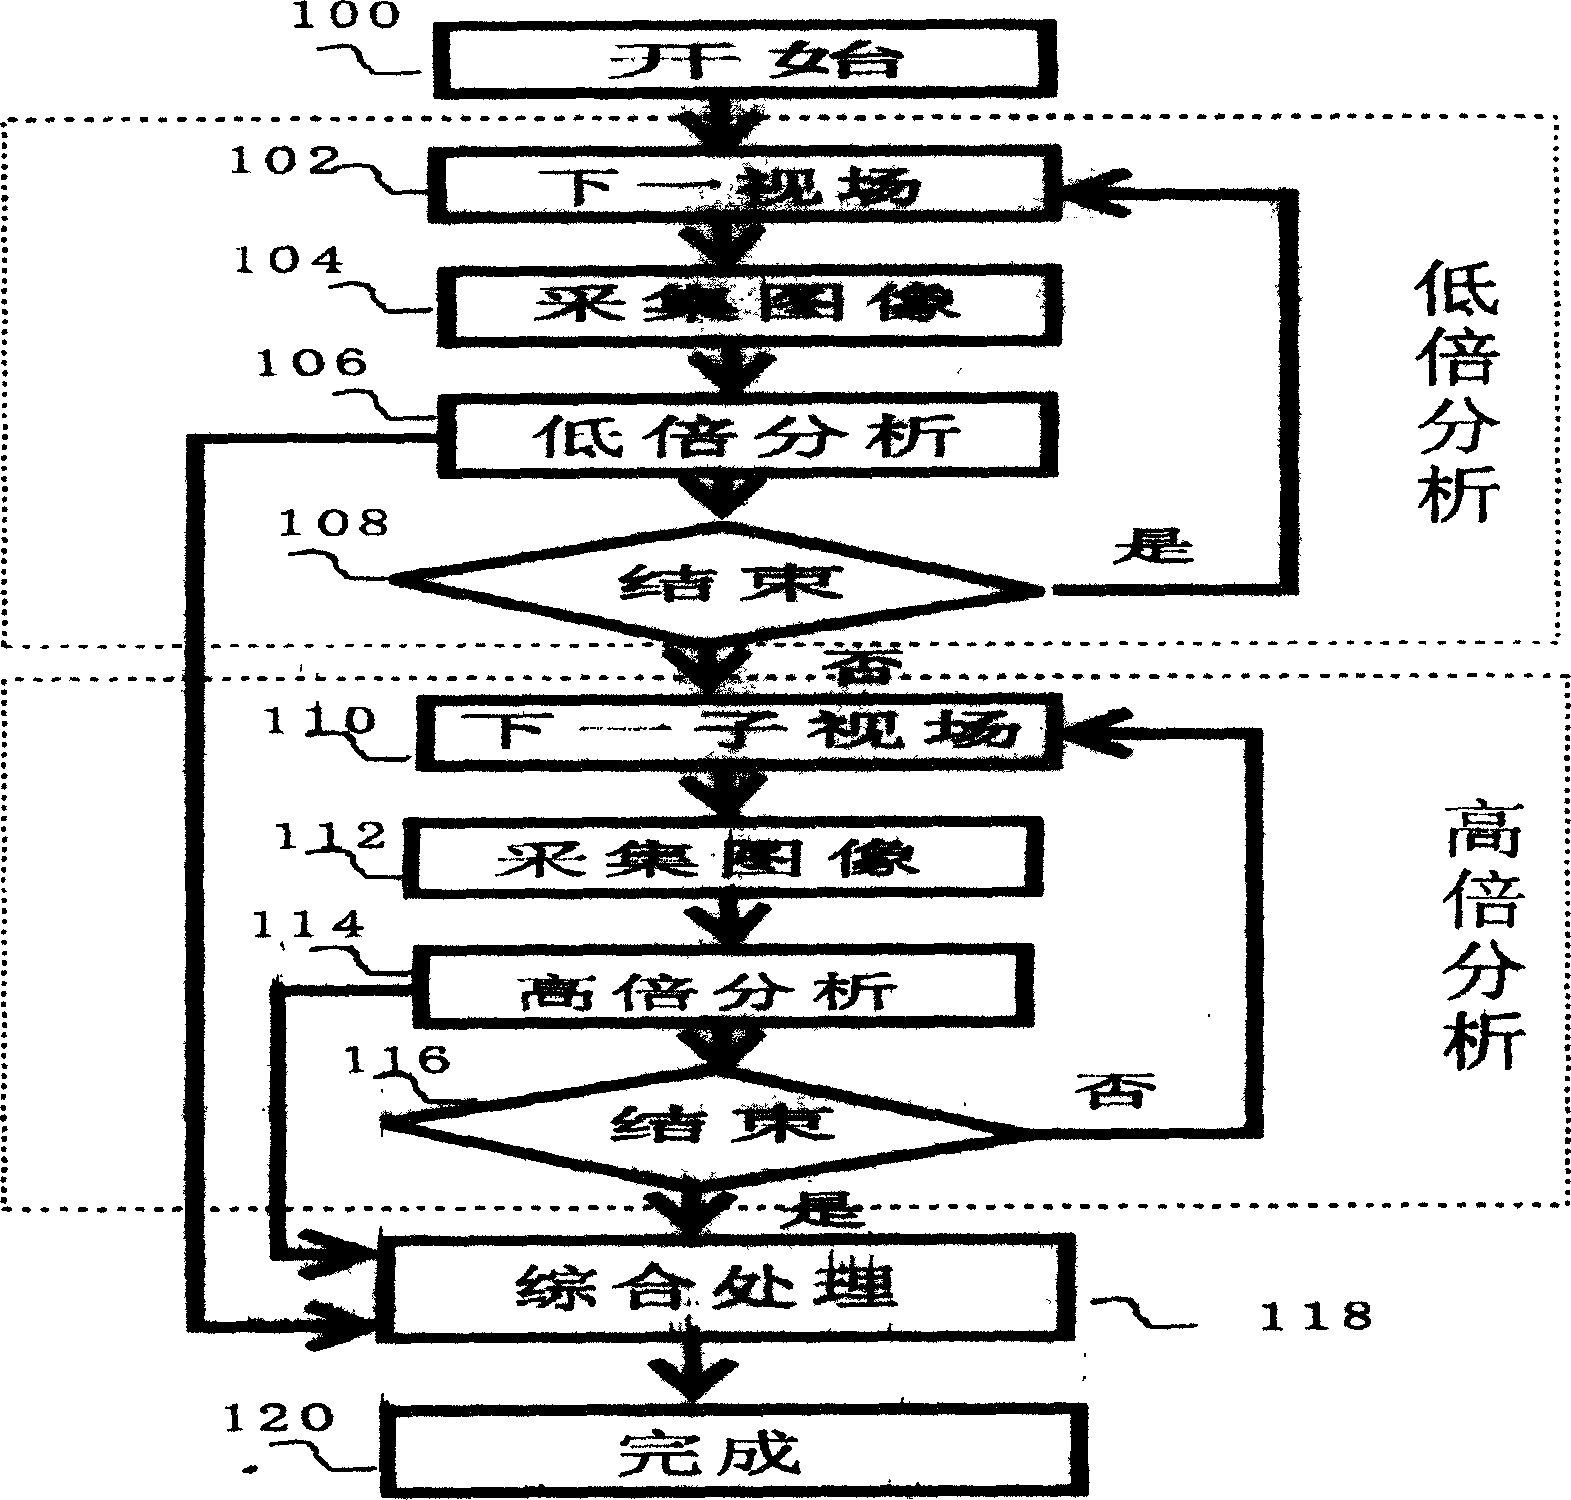 Automatic multispectral cell smear and analyzing instrument and method used for cervical cell analysis